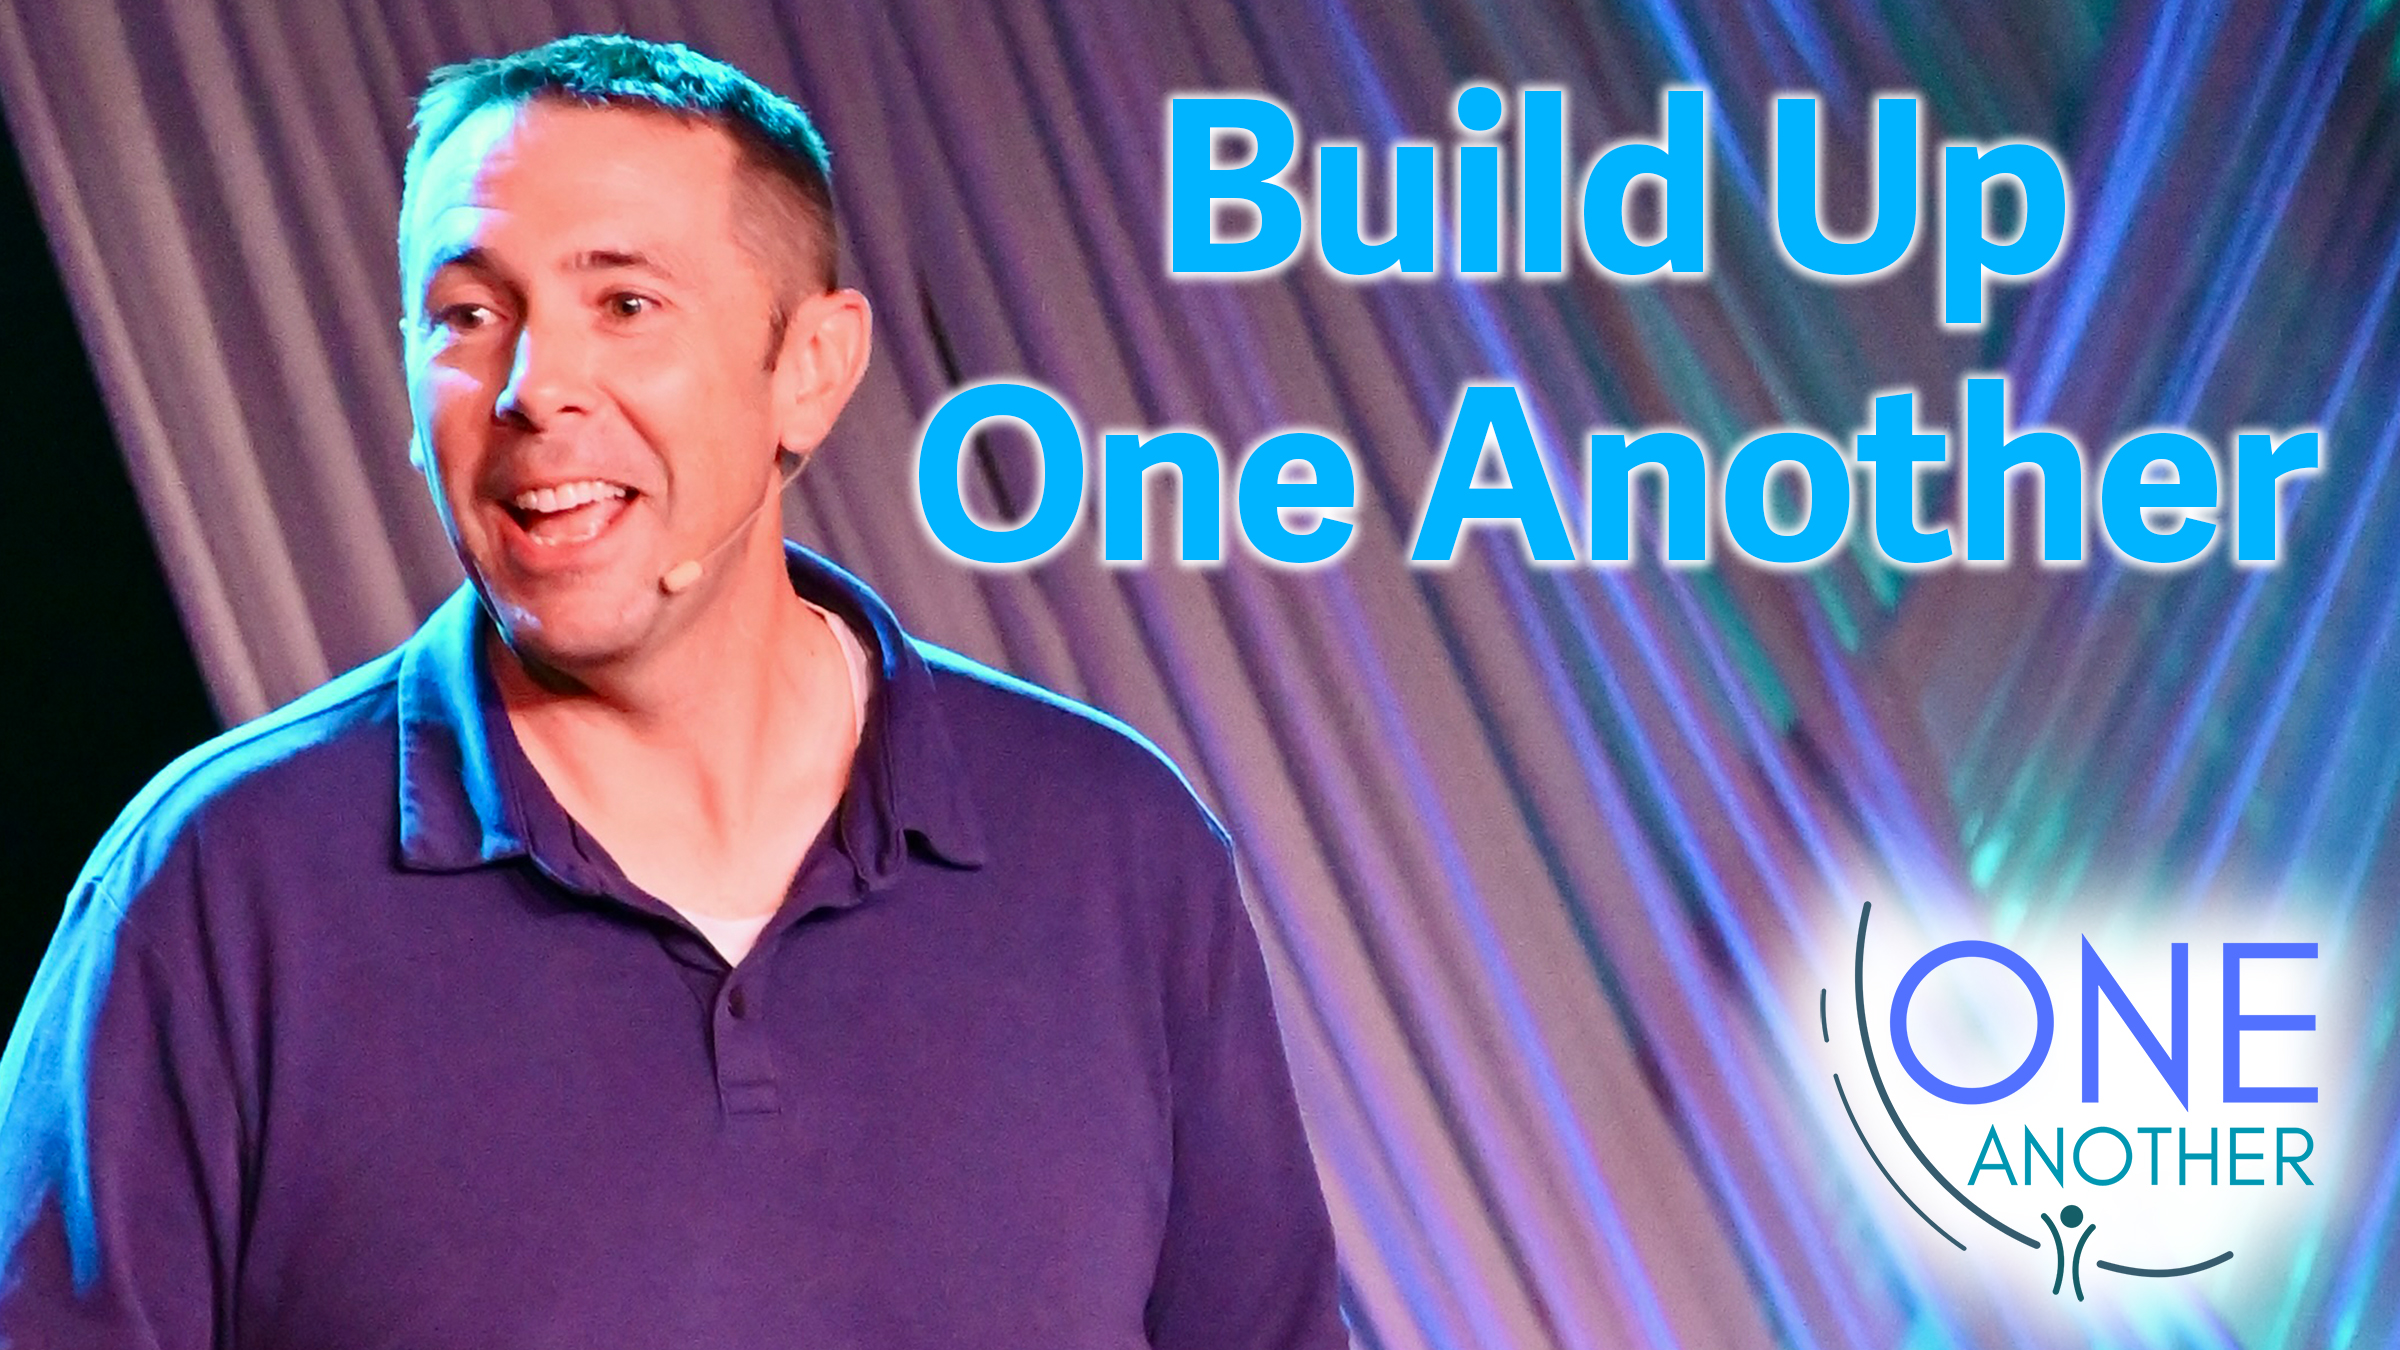 One Another - Build Up One Another